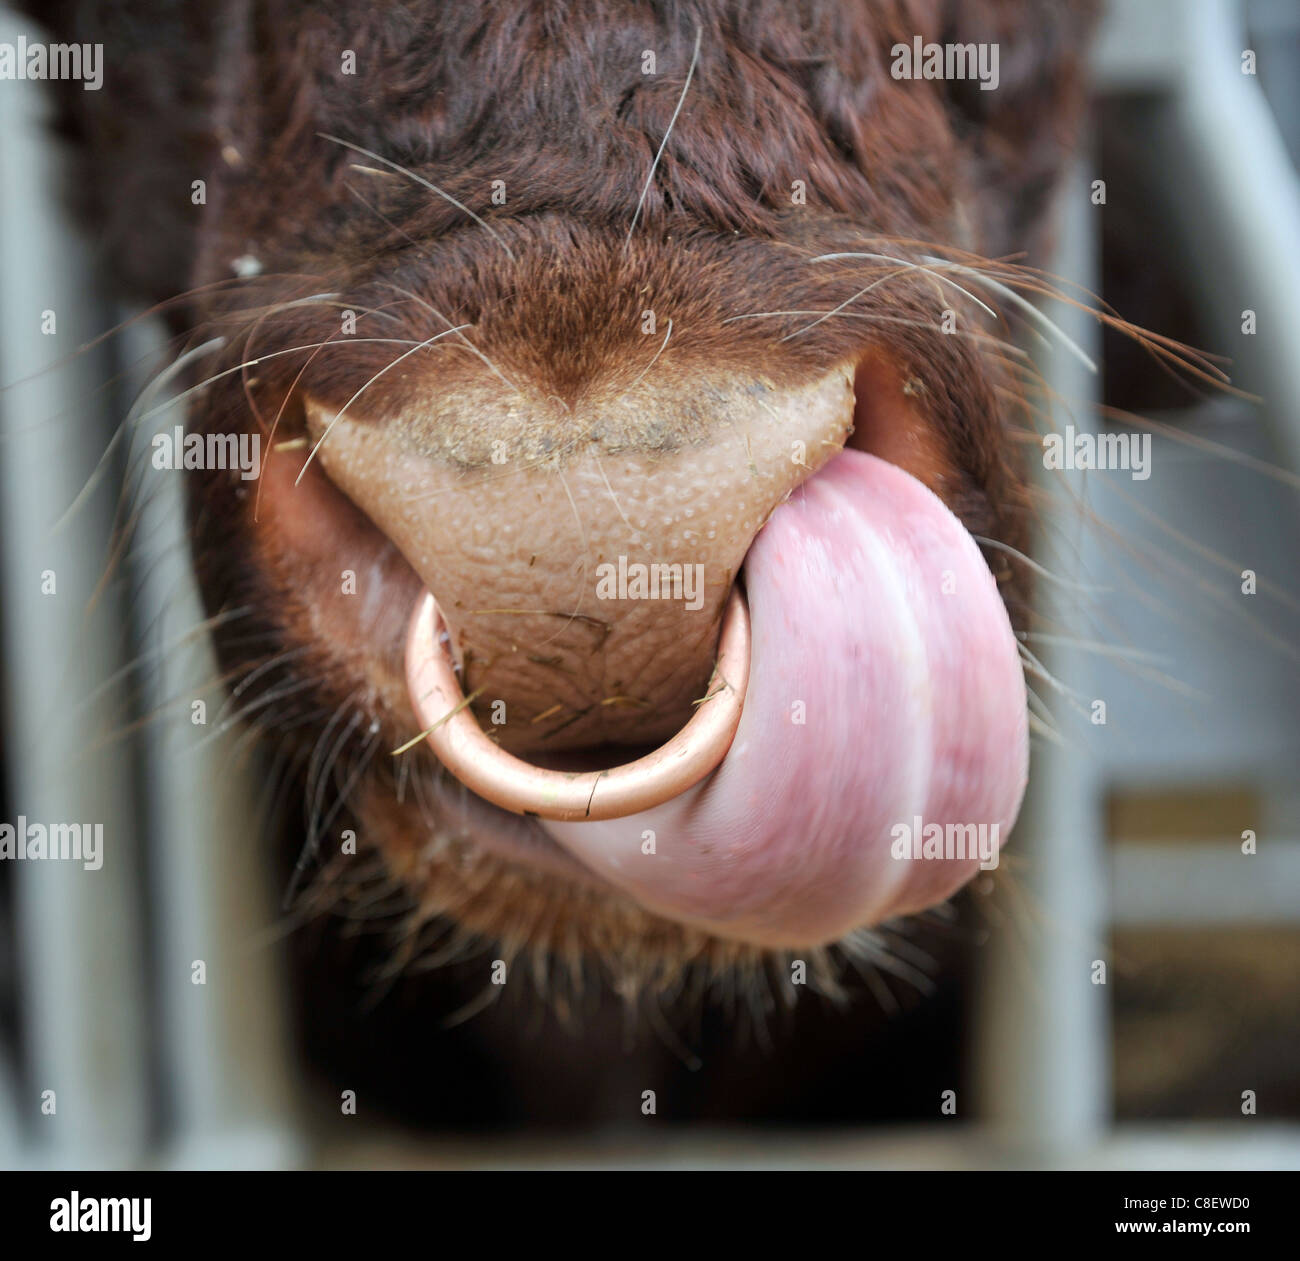 Detail of a cows nose with a brass ring through it. Stock Photo